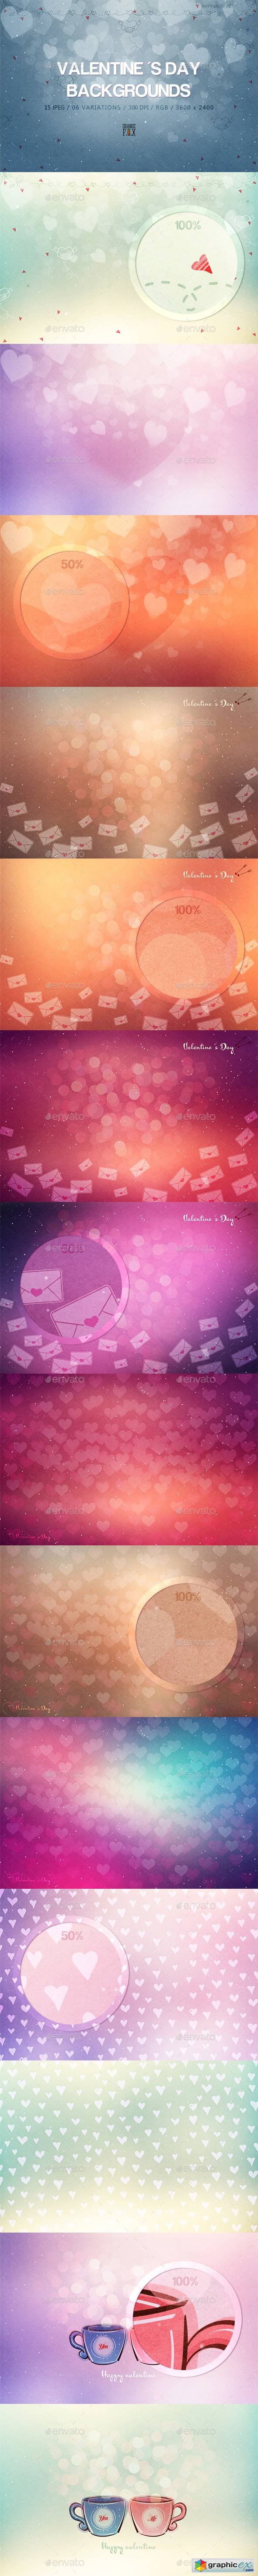 15 Valentines Day Backgrounds